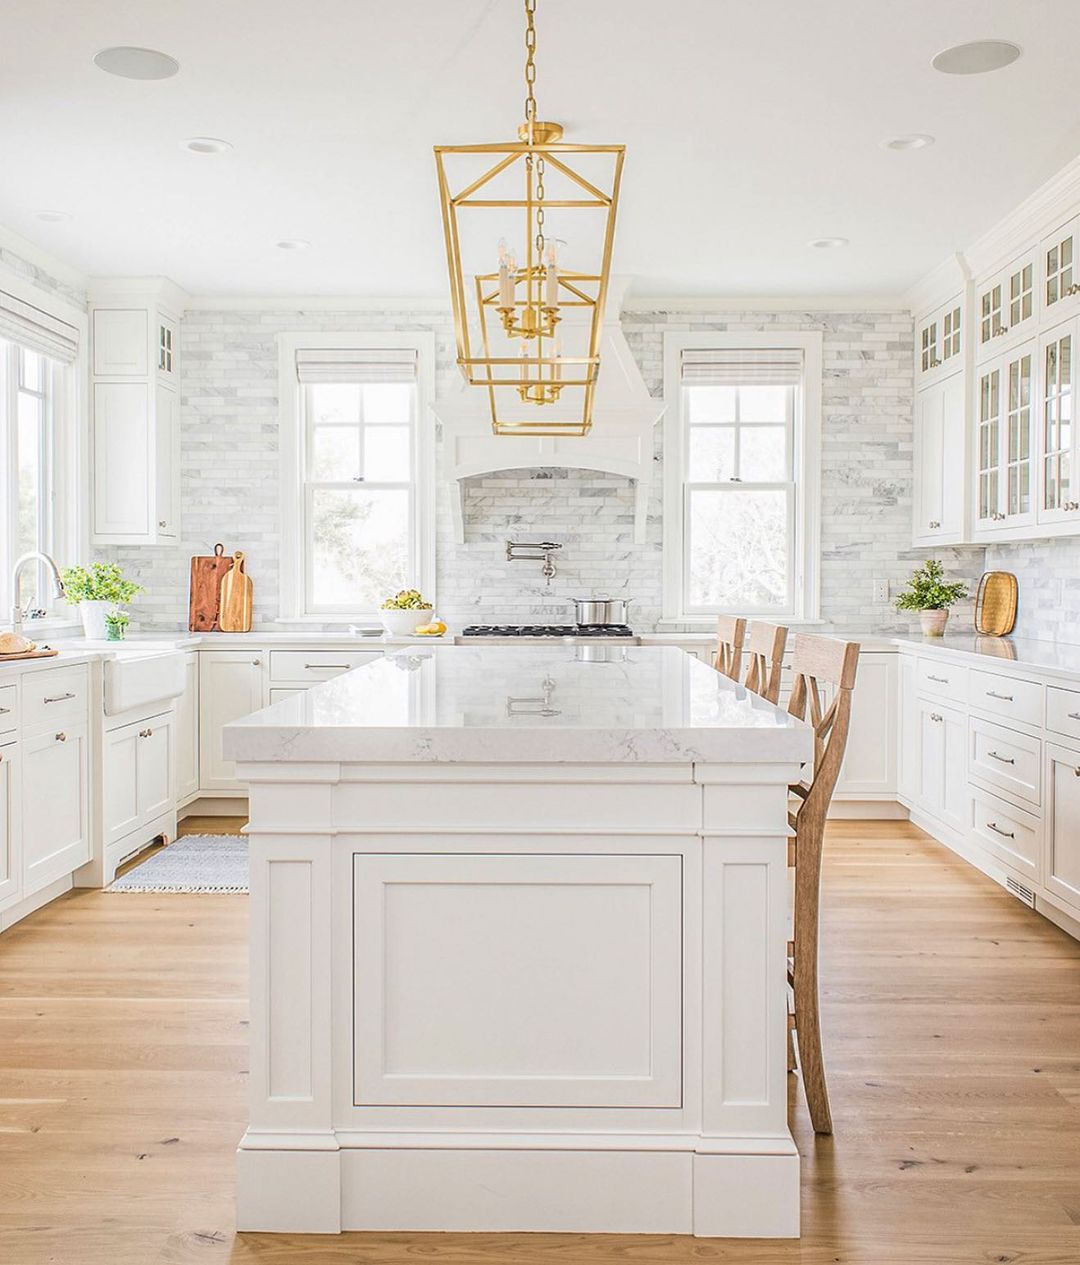 Bright and Airy with Marble Subway Tiles